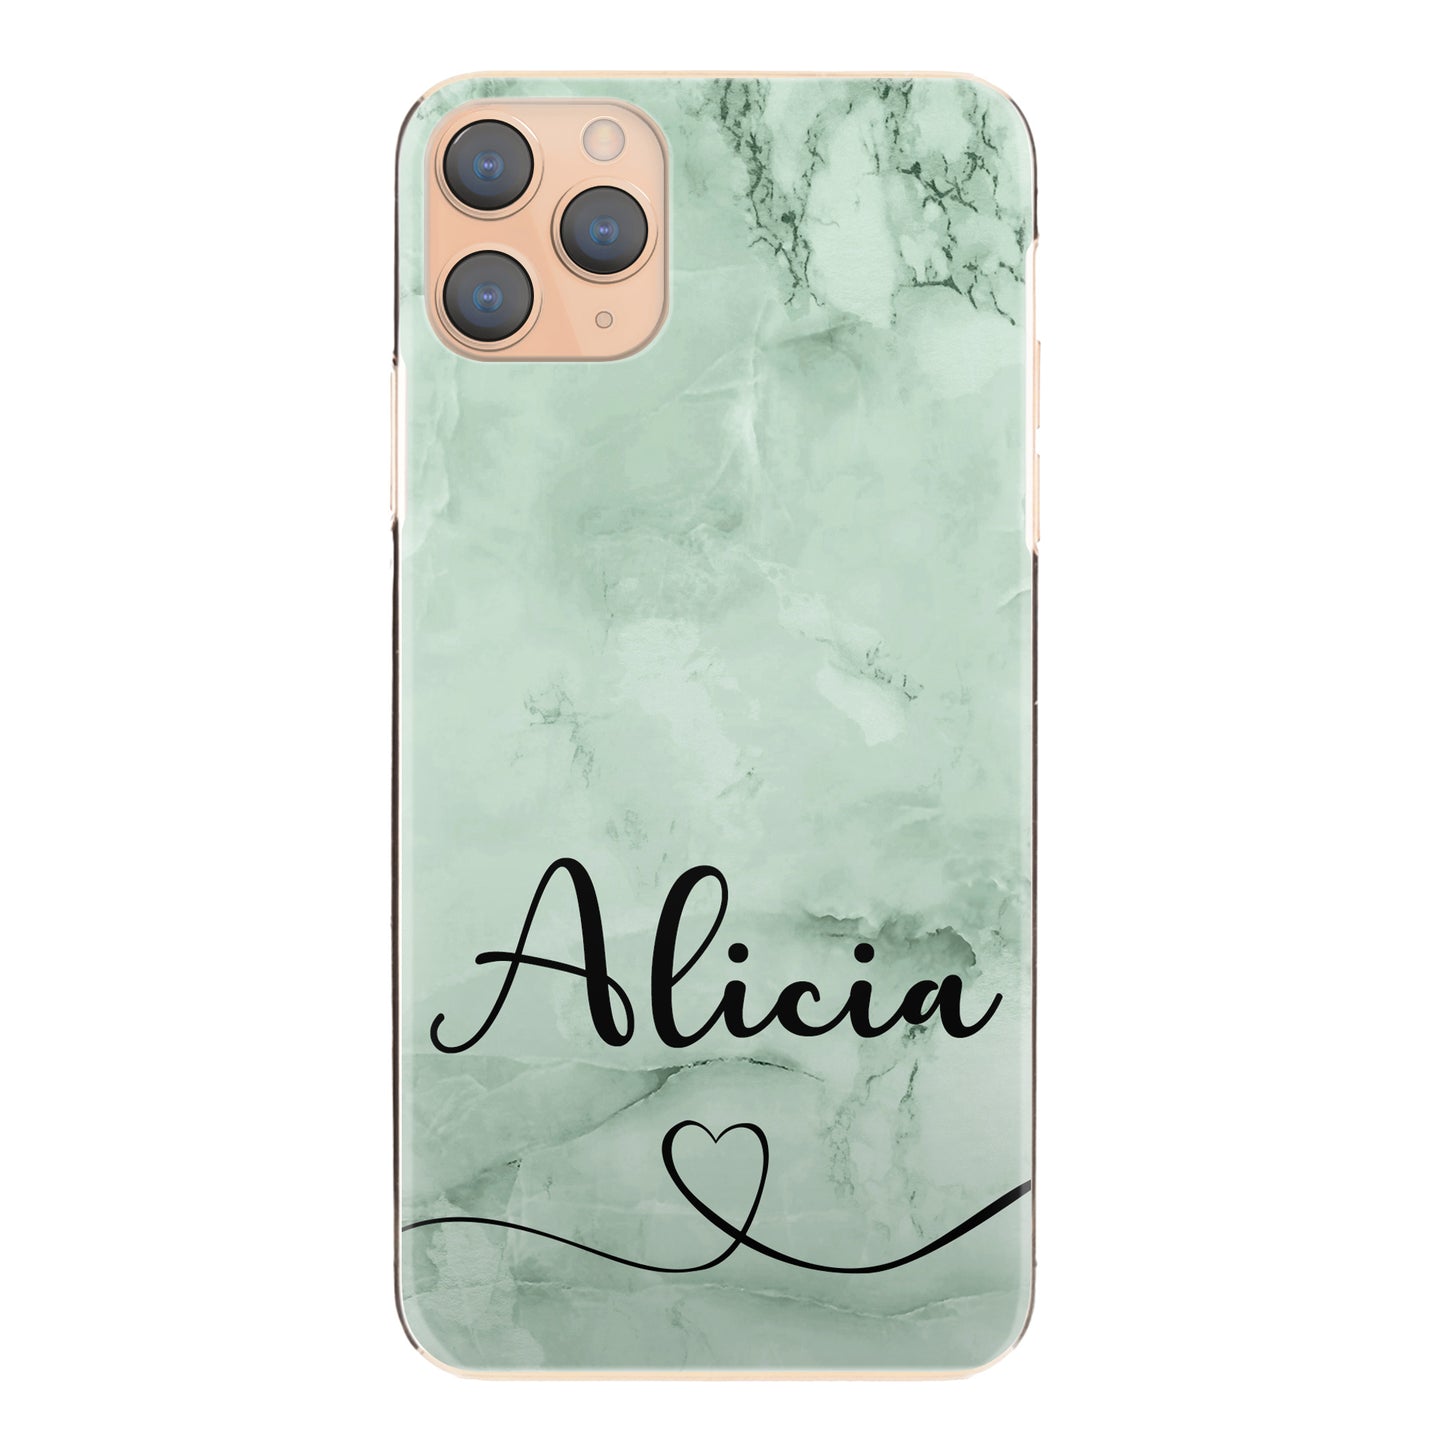 Personalised Huawei Phone Hard Case with Heart Accented Stylish Text on Mint Green Marble